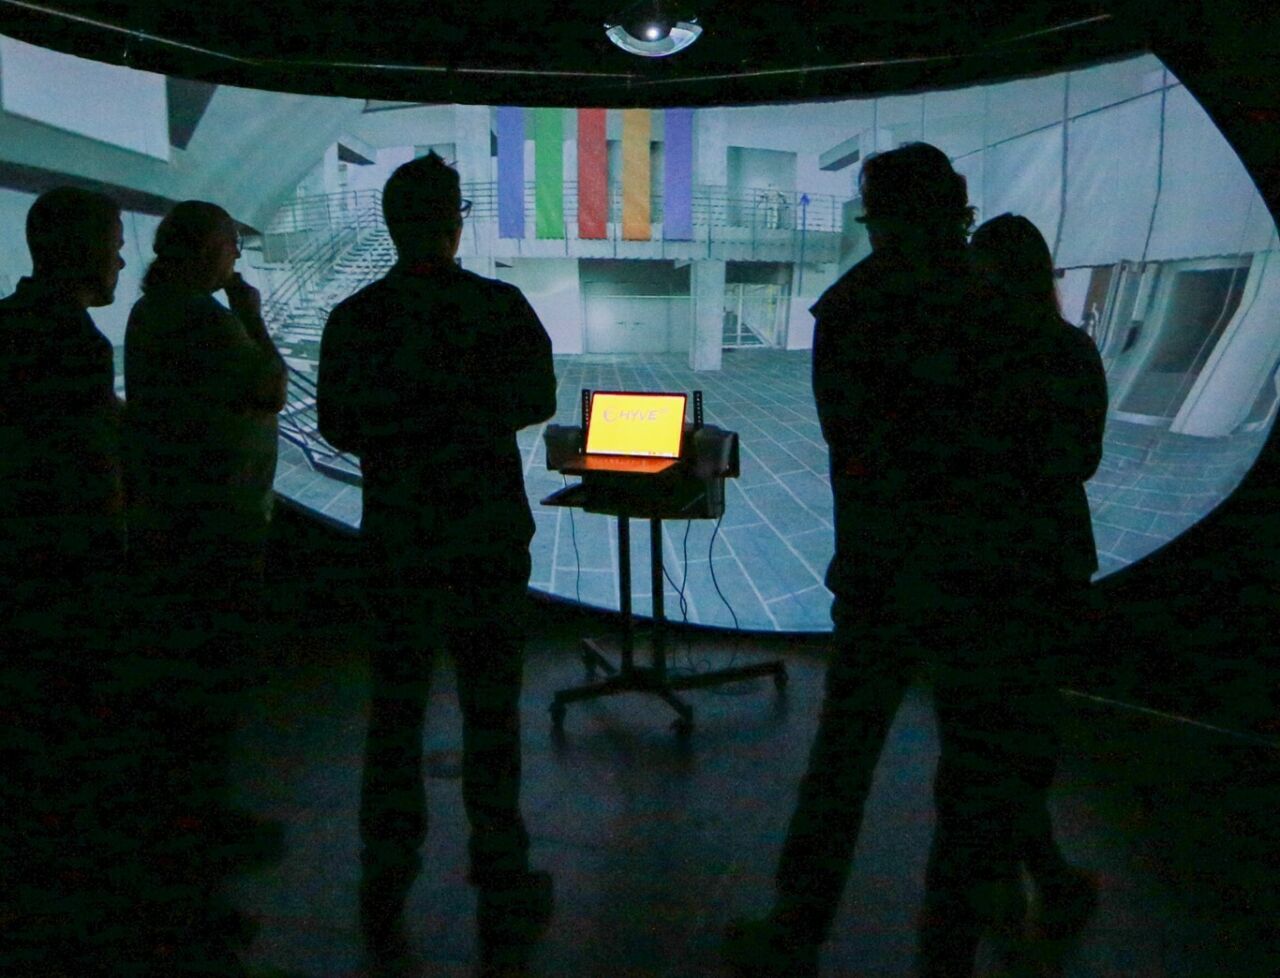 A group of researchers standing in a darkened room engaging with a virtual environment projection